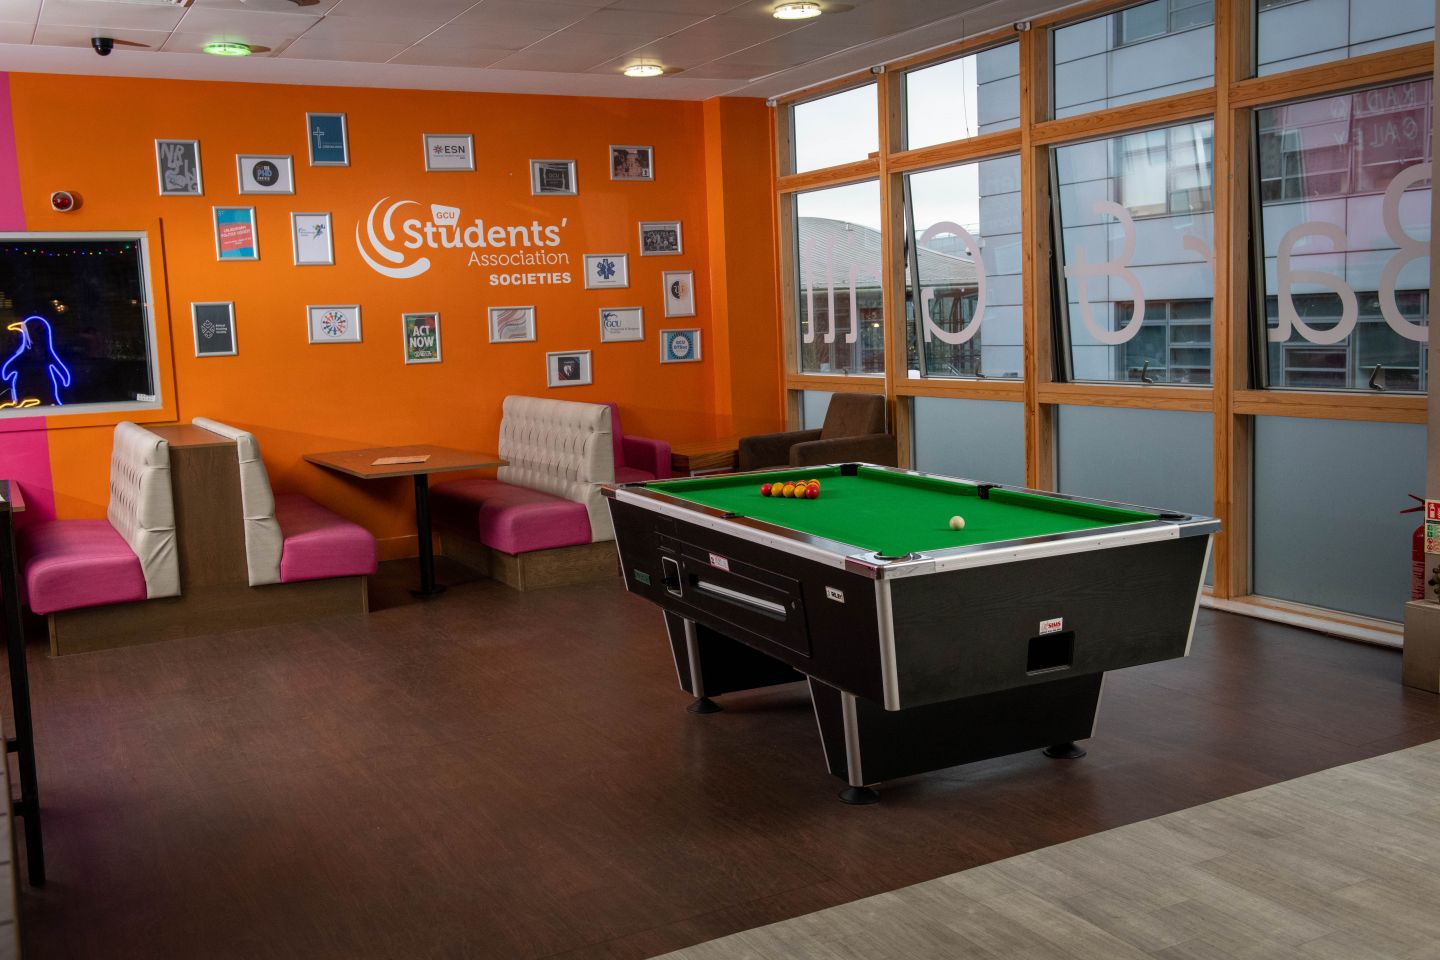 A pool table in the Re:Union Bar and Grill on Glasgow campus. Photo taken in December 2021.